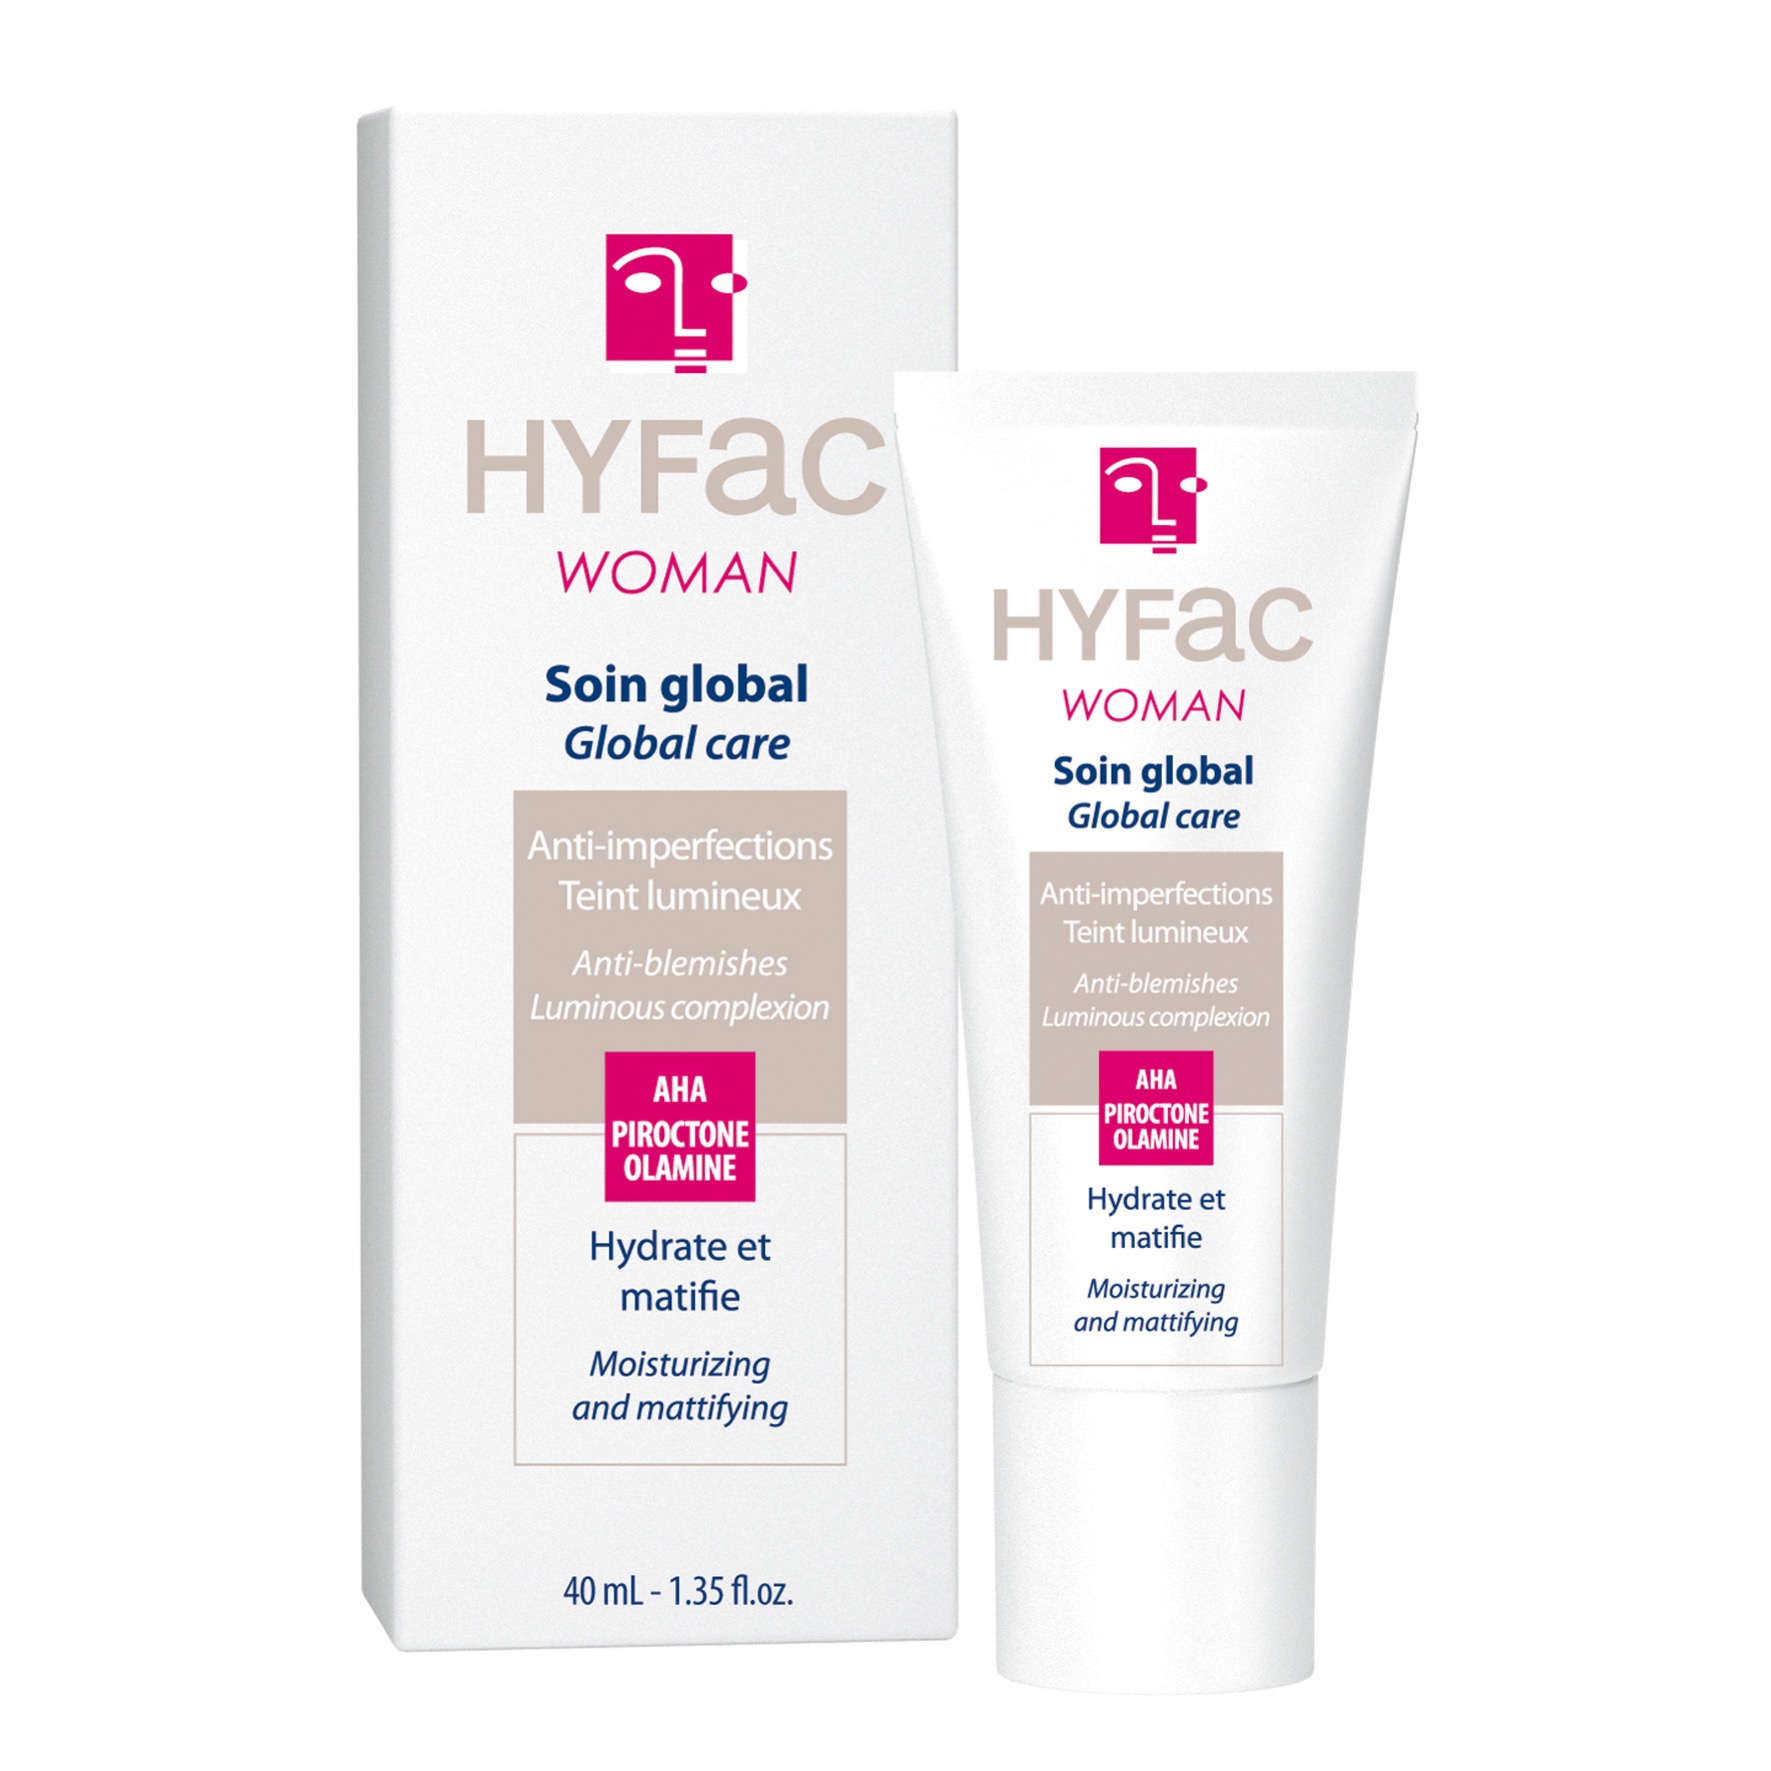 HYFAC WOMAN global anti-imperfection care for women